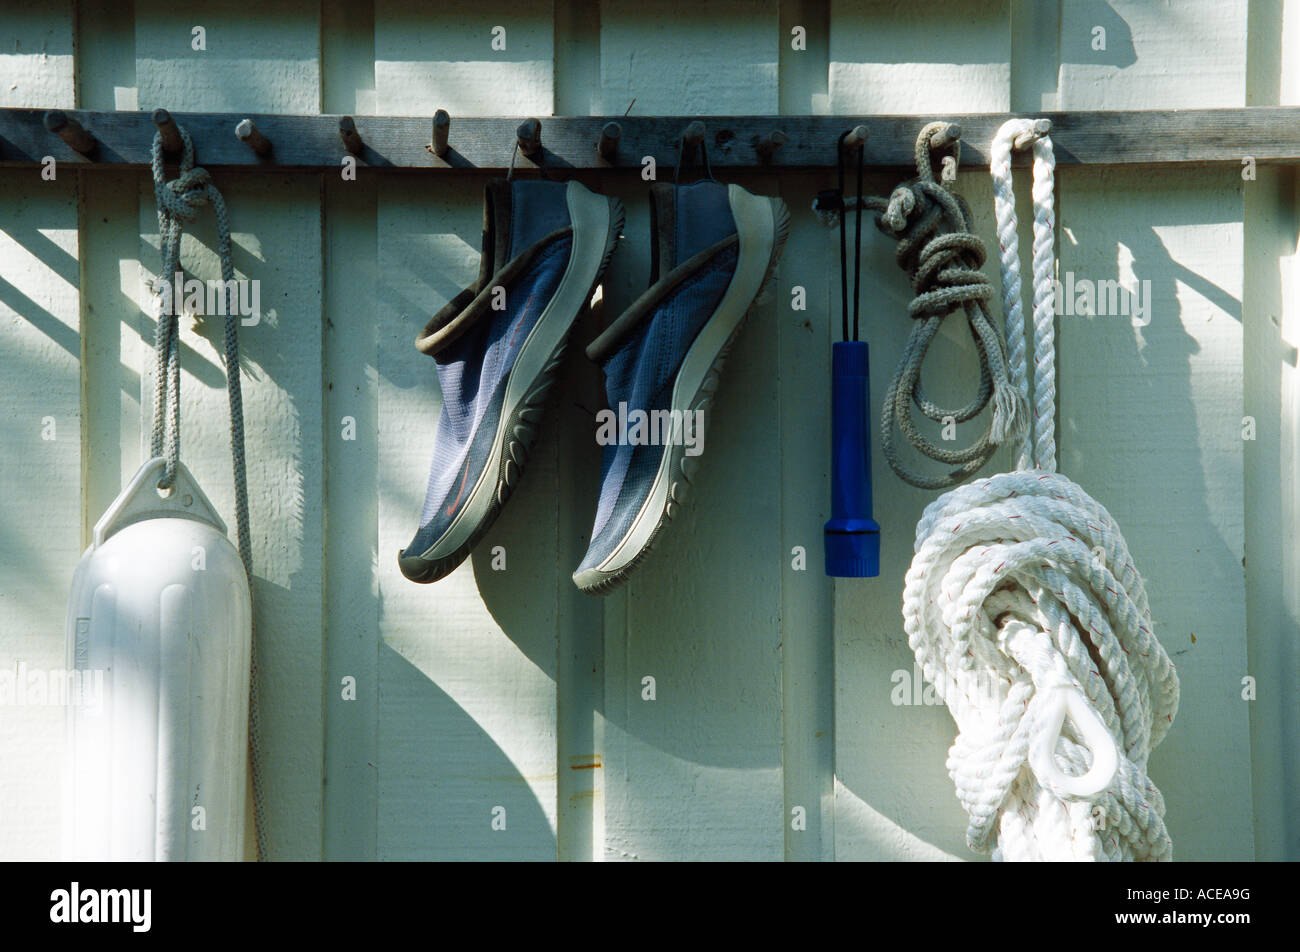 A pair of shoes a buoy and ropes hanging on hooks on a house wall. Stock Photo